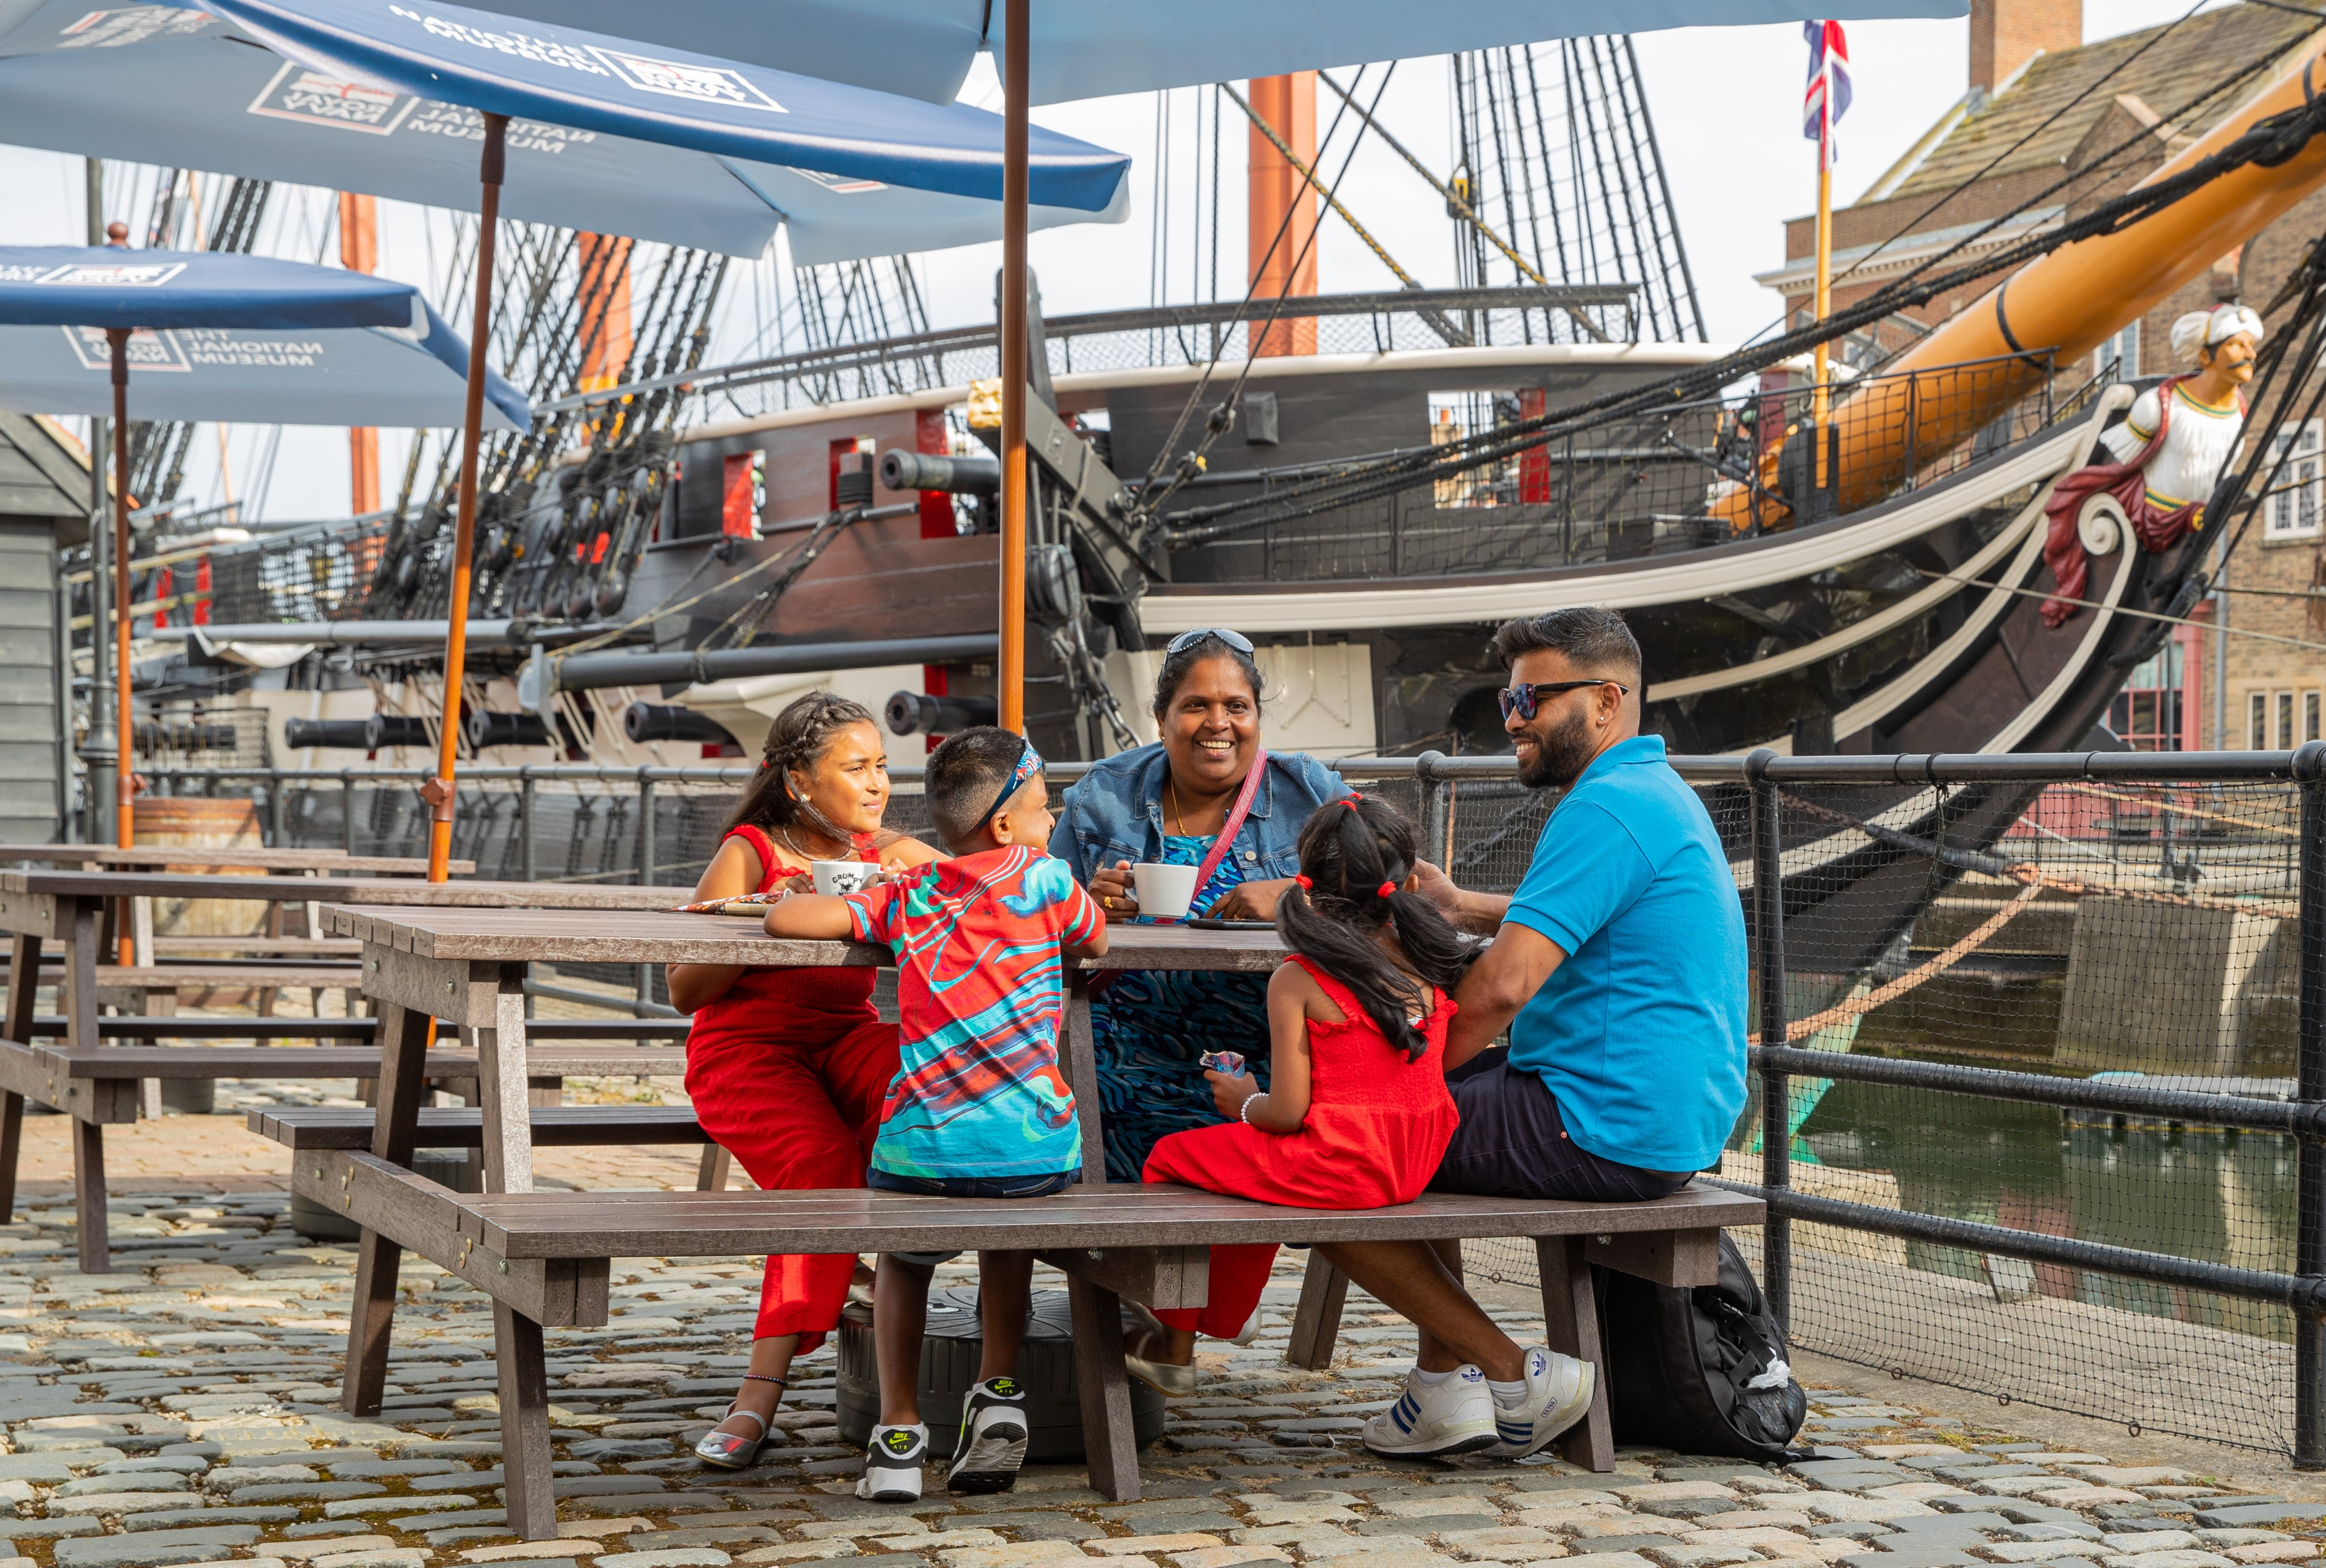 A family sitting on a bench in front of HMS Trincomalee